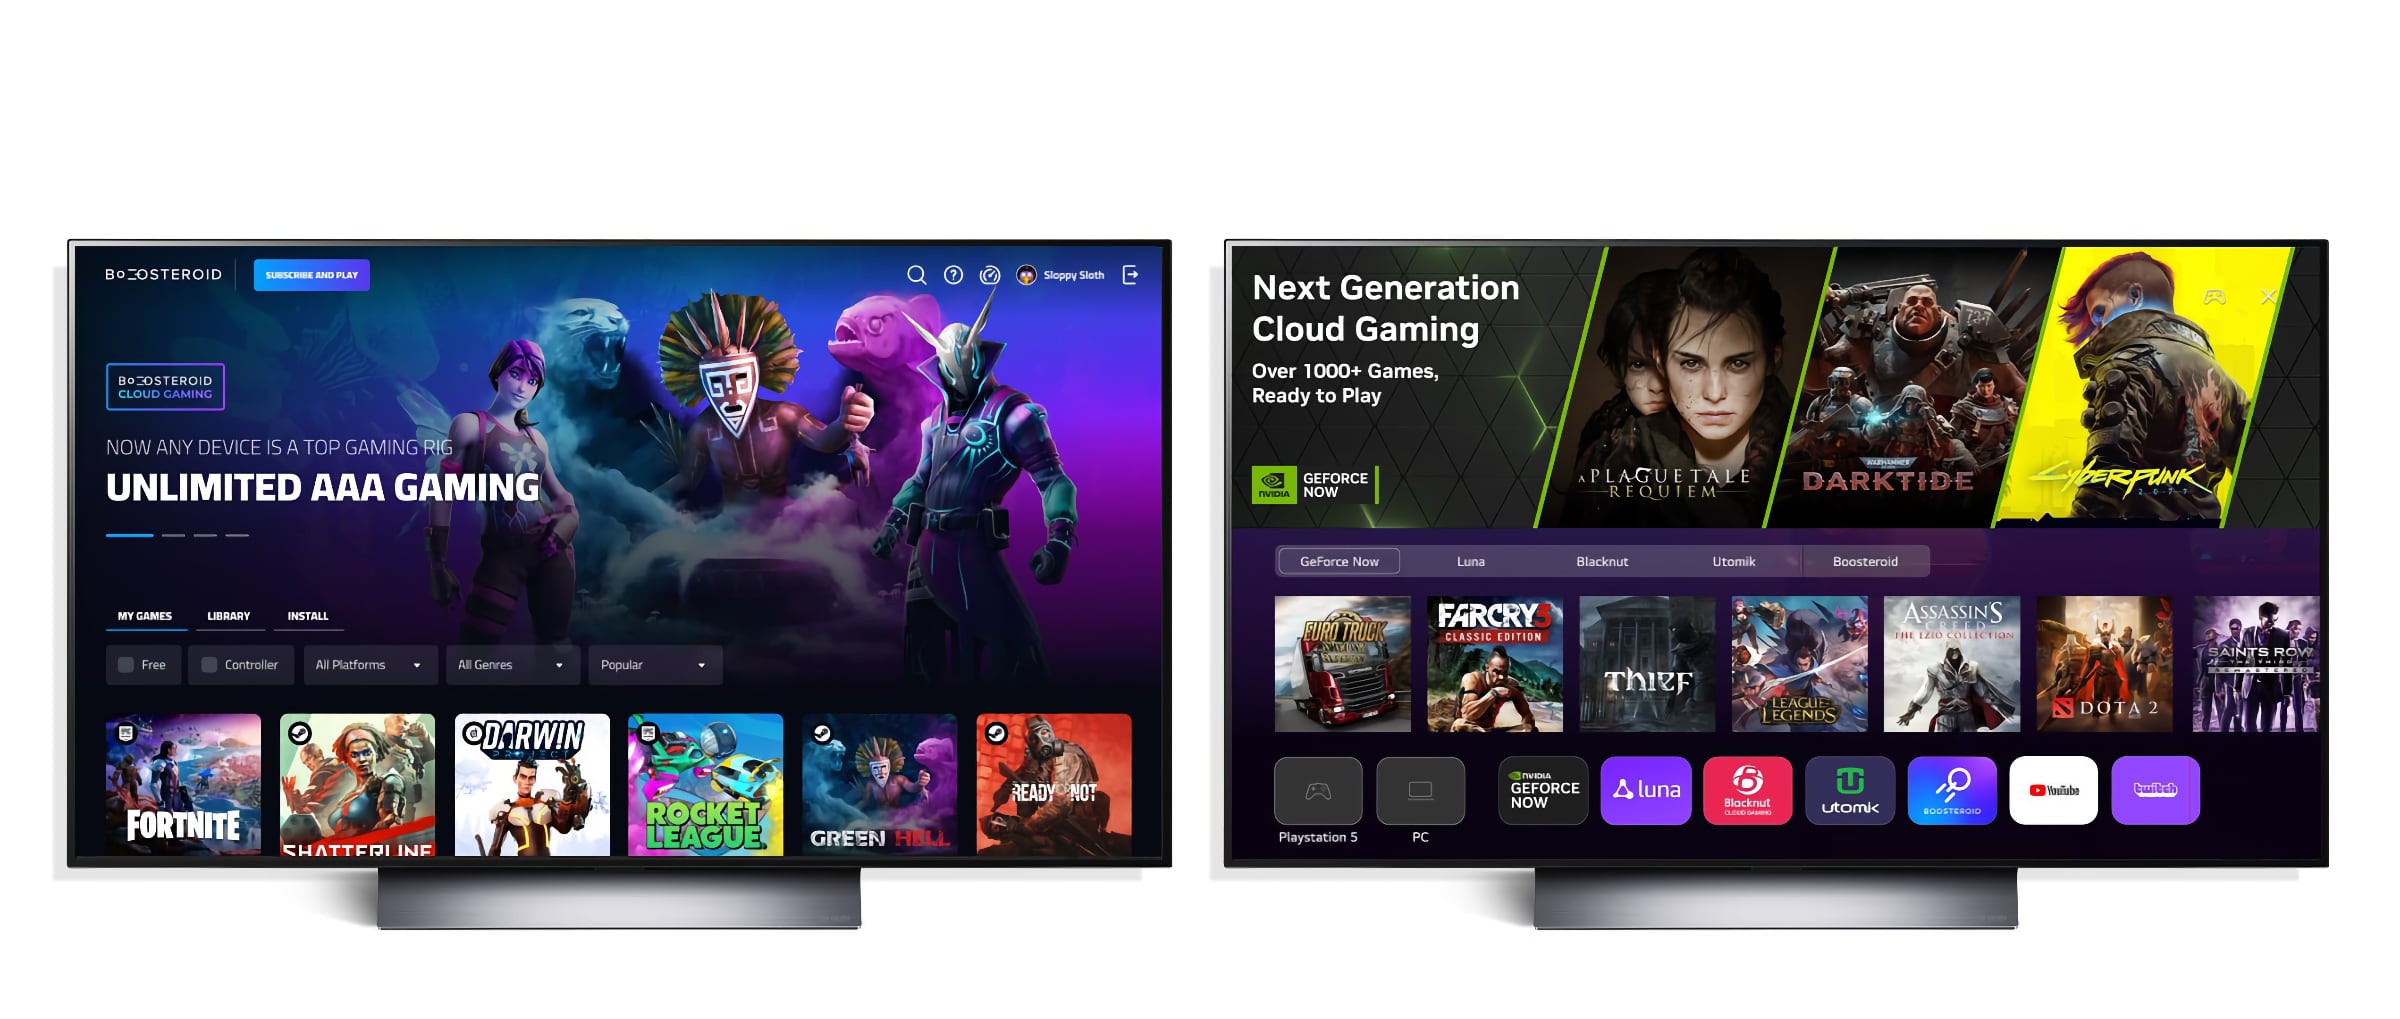 GeForce Now in 4K and Boosteroid land on 2023 LG TVs – later 2022